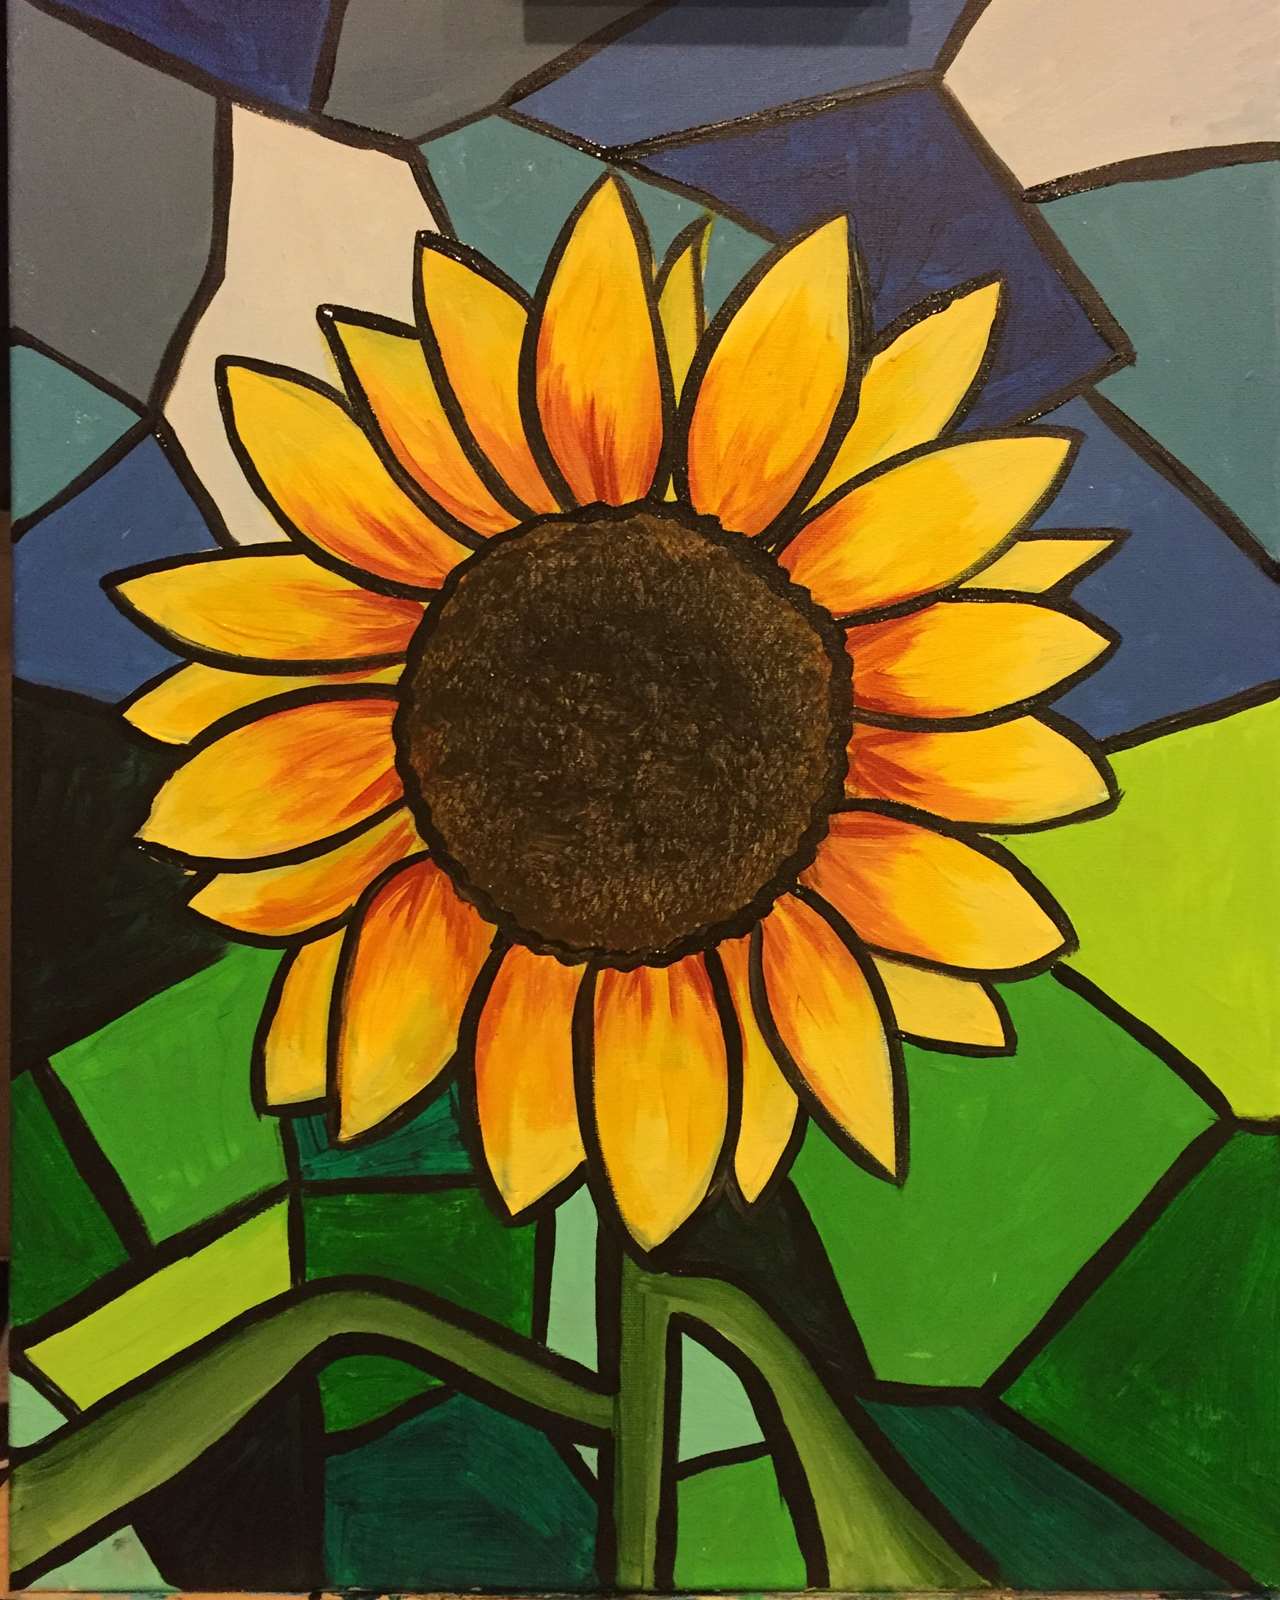 Stained Glass Sunflower - Sat, Mar 23 4PM at Katy